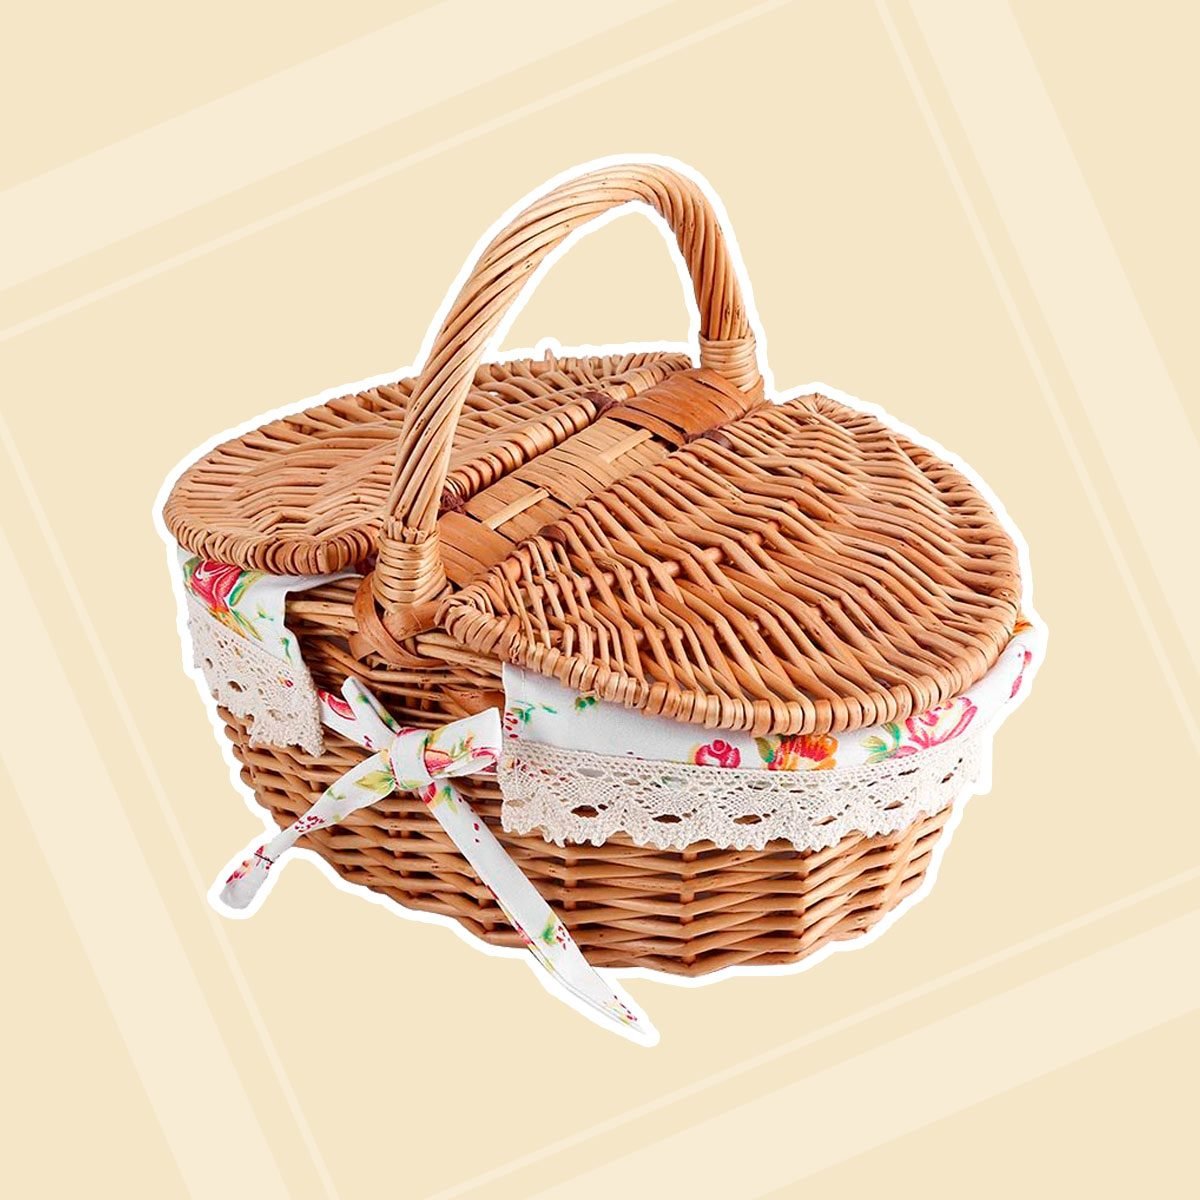 10 of the Best Picnic Baskets You Can Buy | Taste of Home